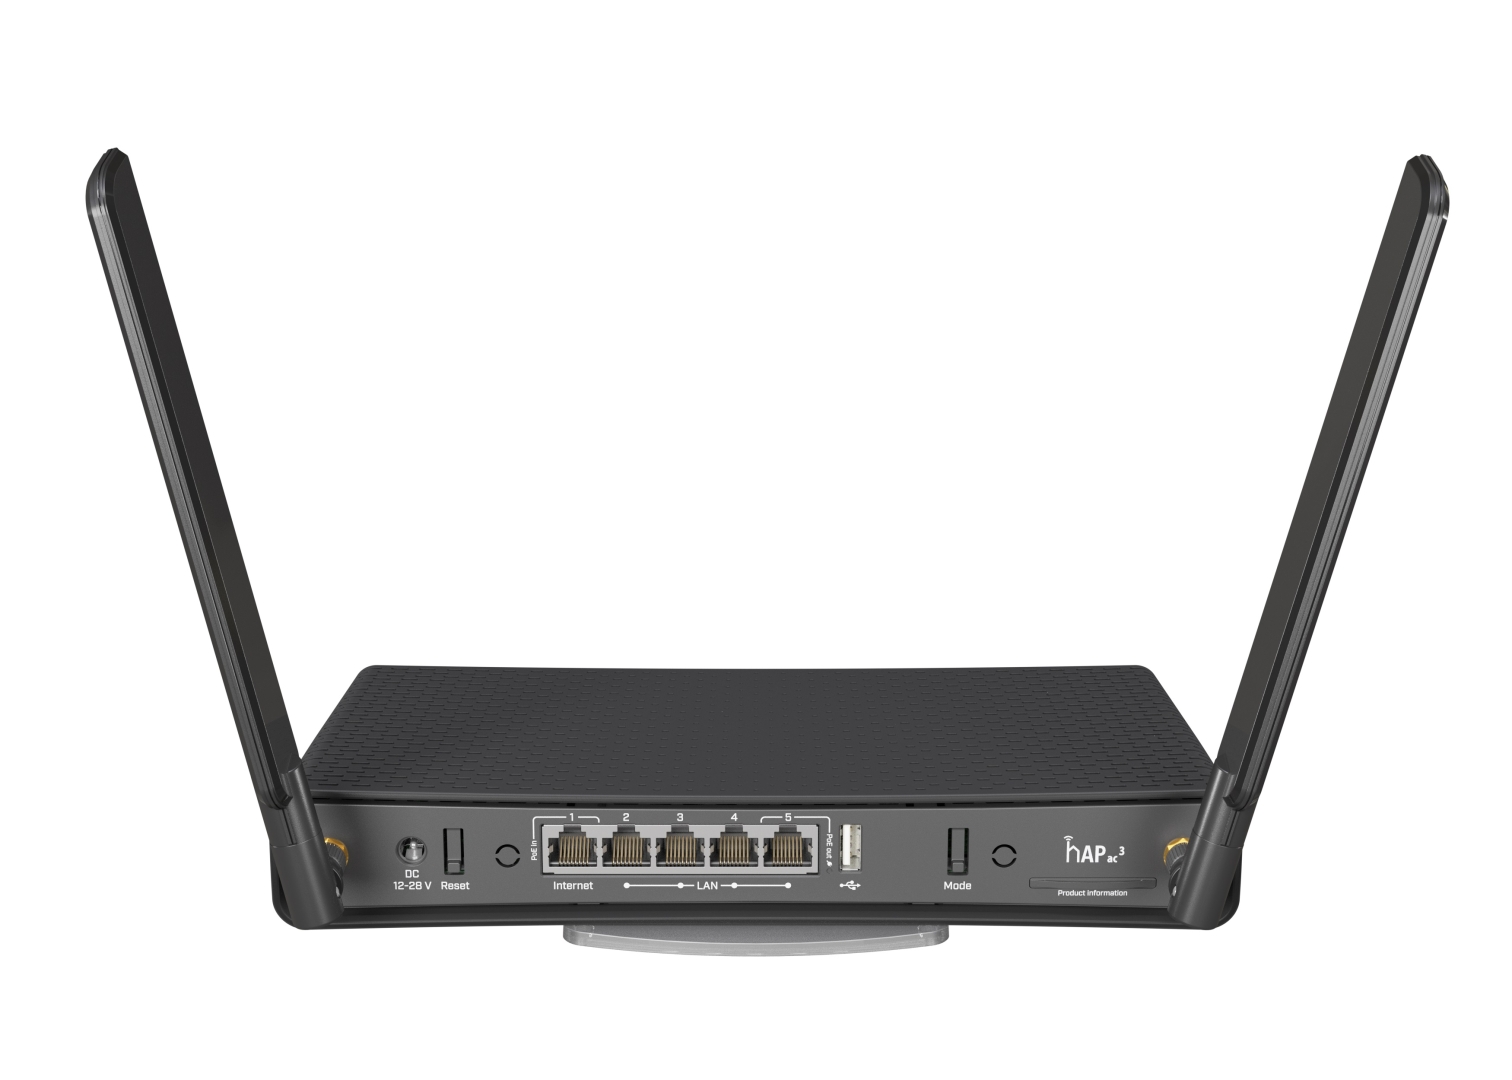 lomme design stadig MIKROTIK wireless dual-band router with 5 Gigabit Ethernet ports and  external high gain antennas for more coverage, hAP ac3 with RouterOS L4  license (RBD53iG-5HacD2HnD) - The source for WiFi products at best